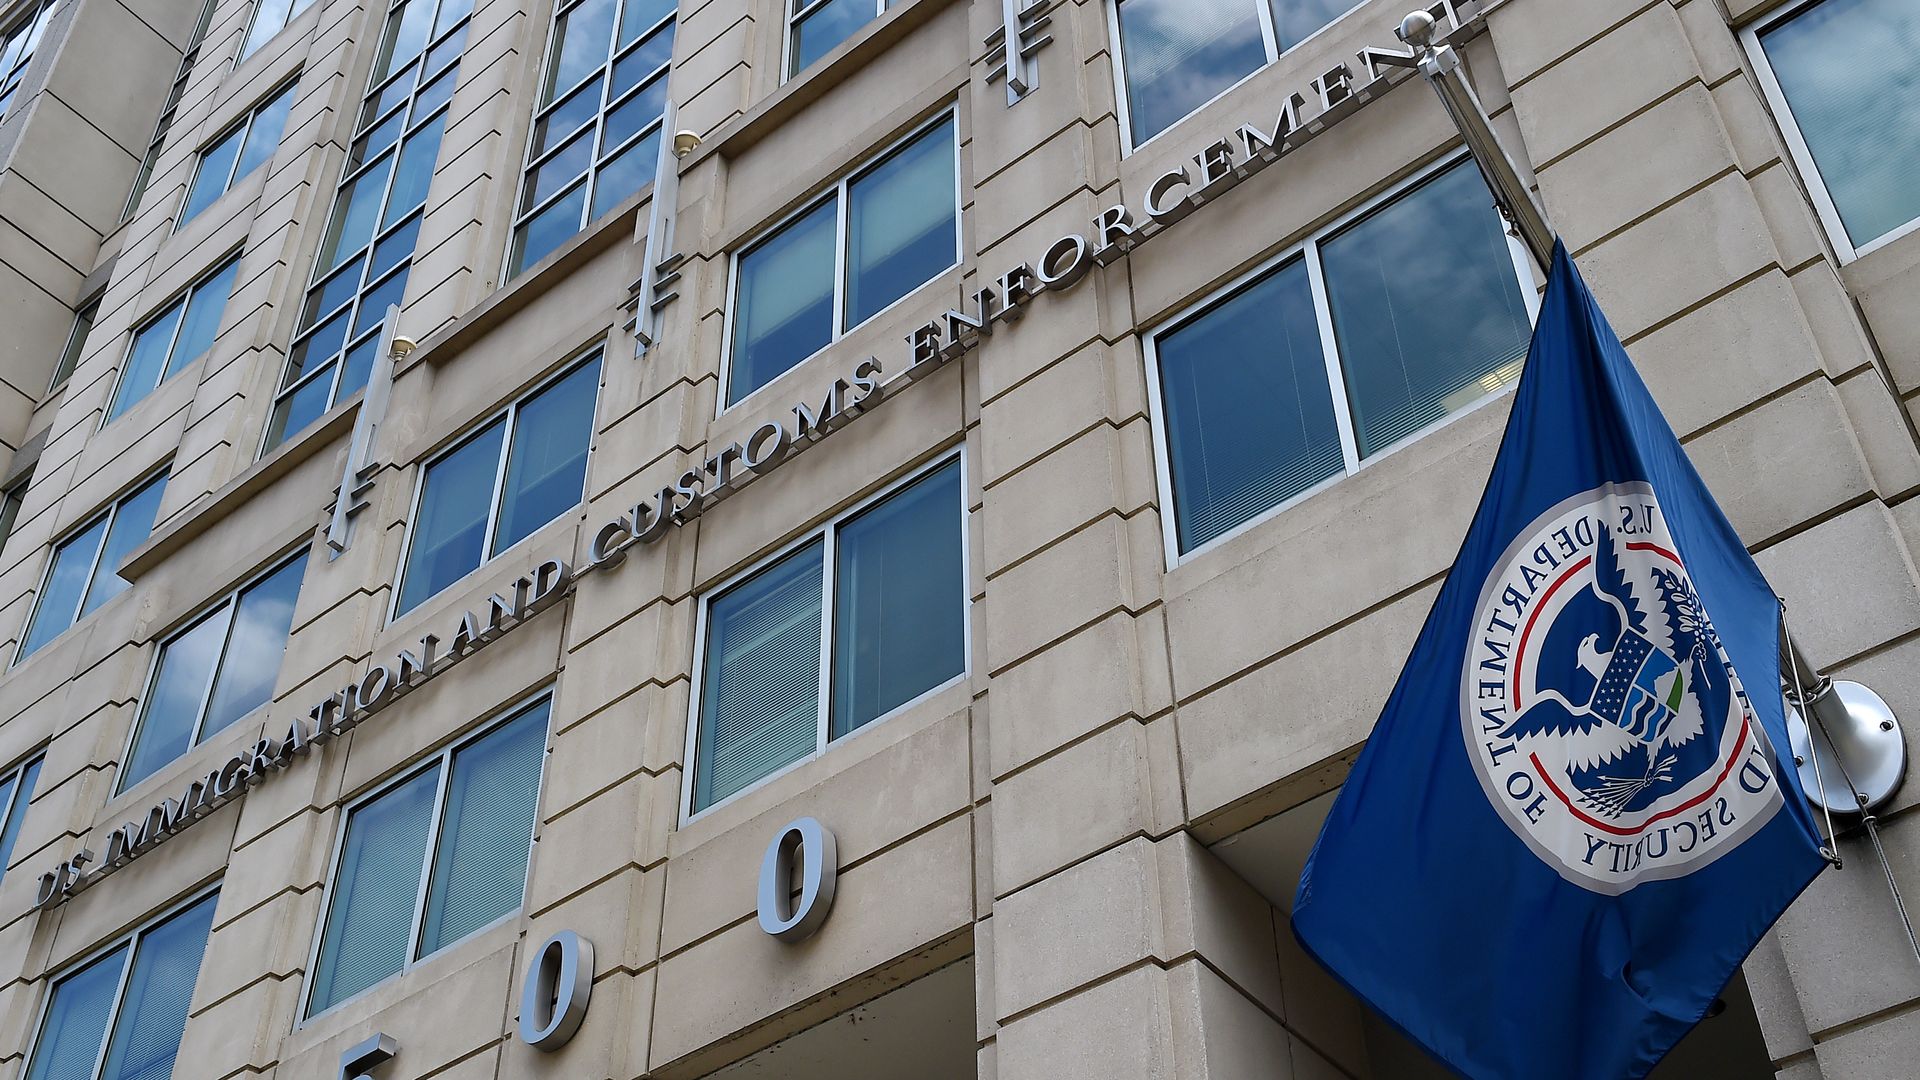 The Immigration and Customs Enforcement building in D.C. with a DHS flag flying out front